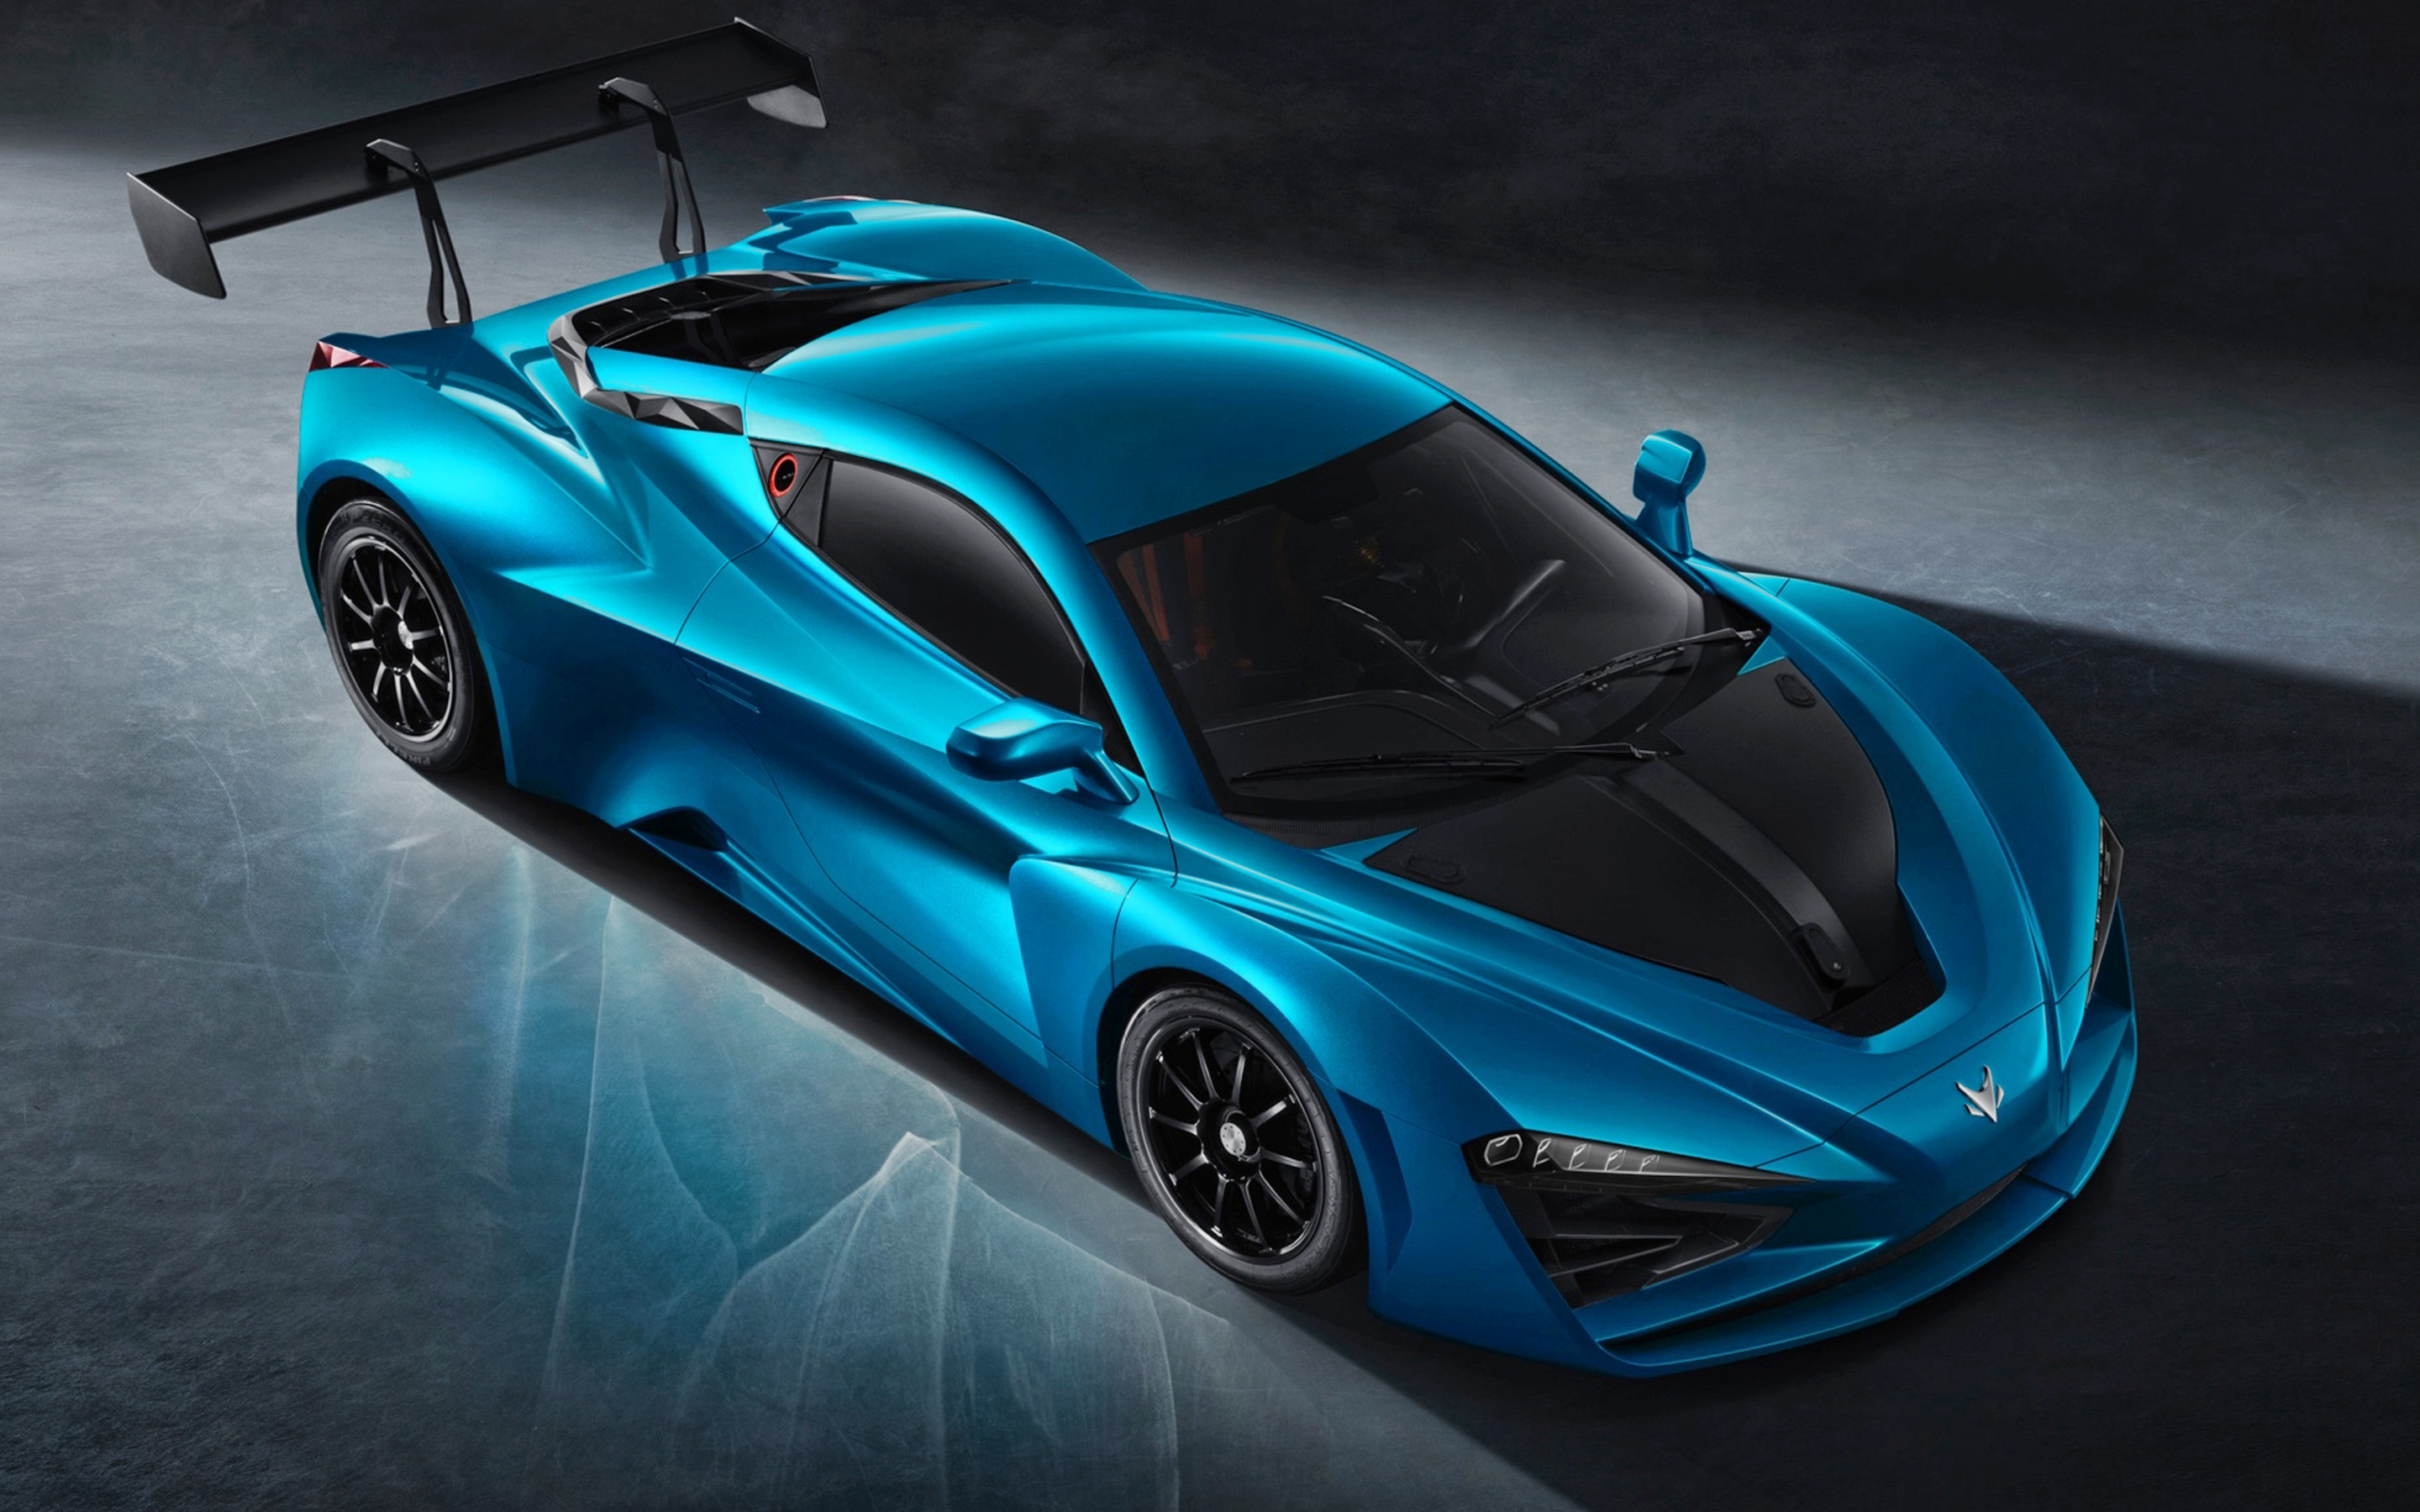 Download wallpapers Arcfox GT Race Edition 2021 hypercar front 2880x1800